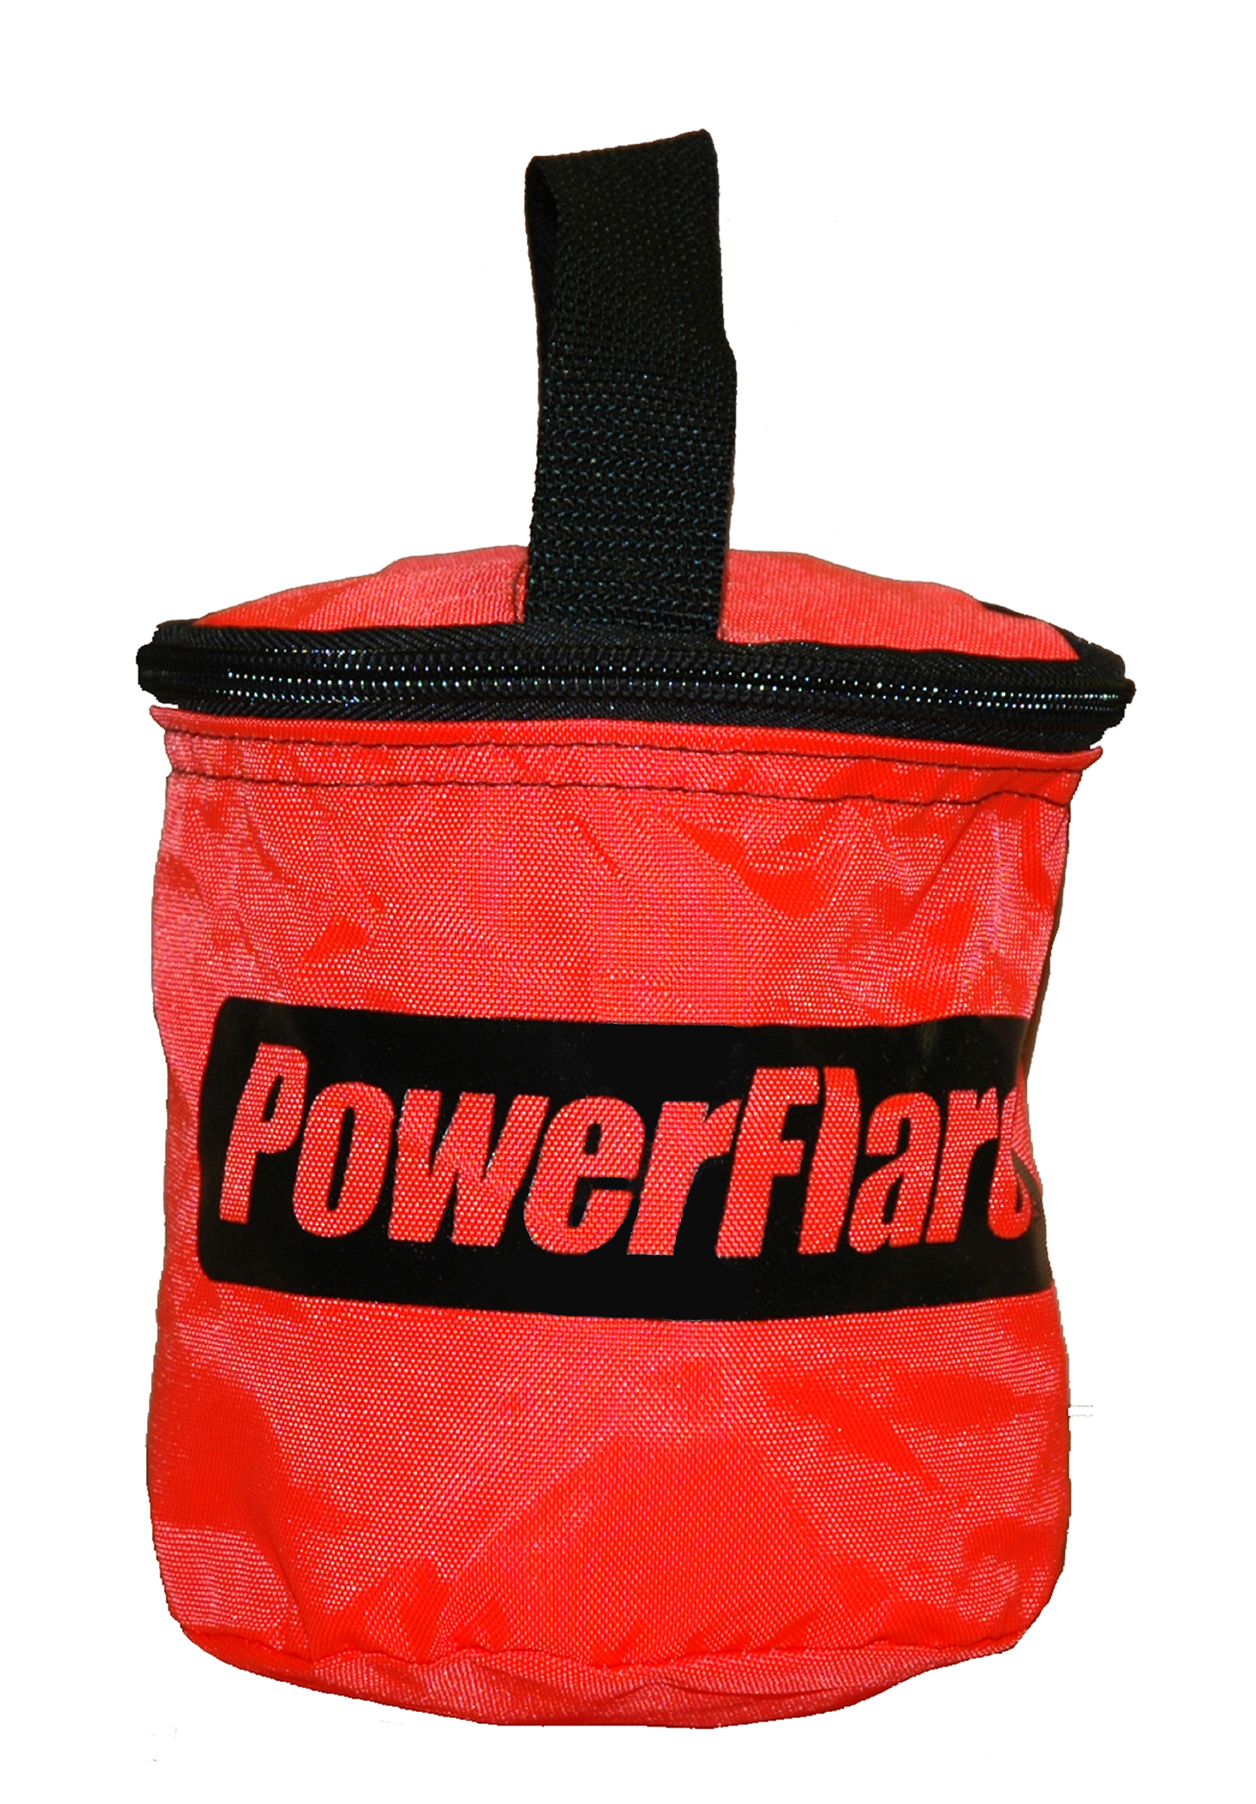 PowerFlare Small Storage & Carry Bag - holds 4 PF-200 Safety